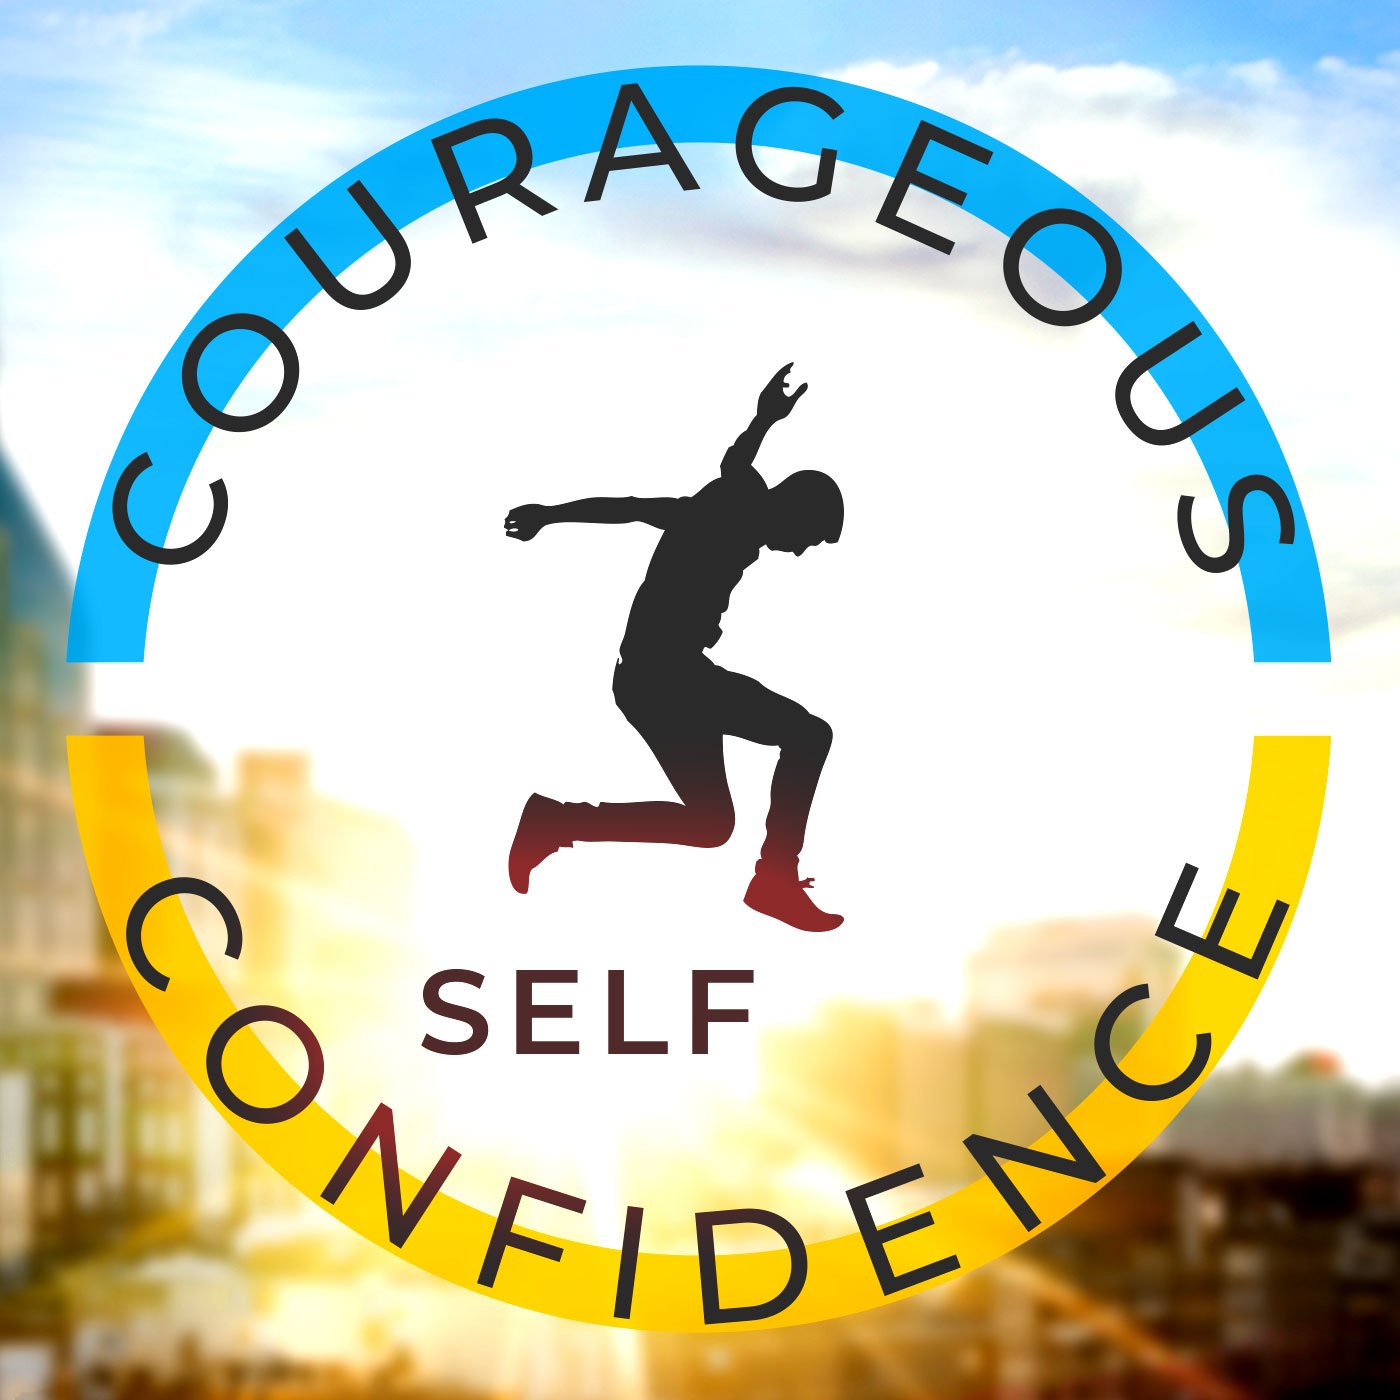 Courageous Self-Confidence Podcast Album Art. Silhouette of man jumping with city in the background.